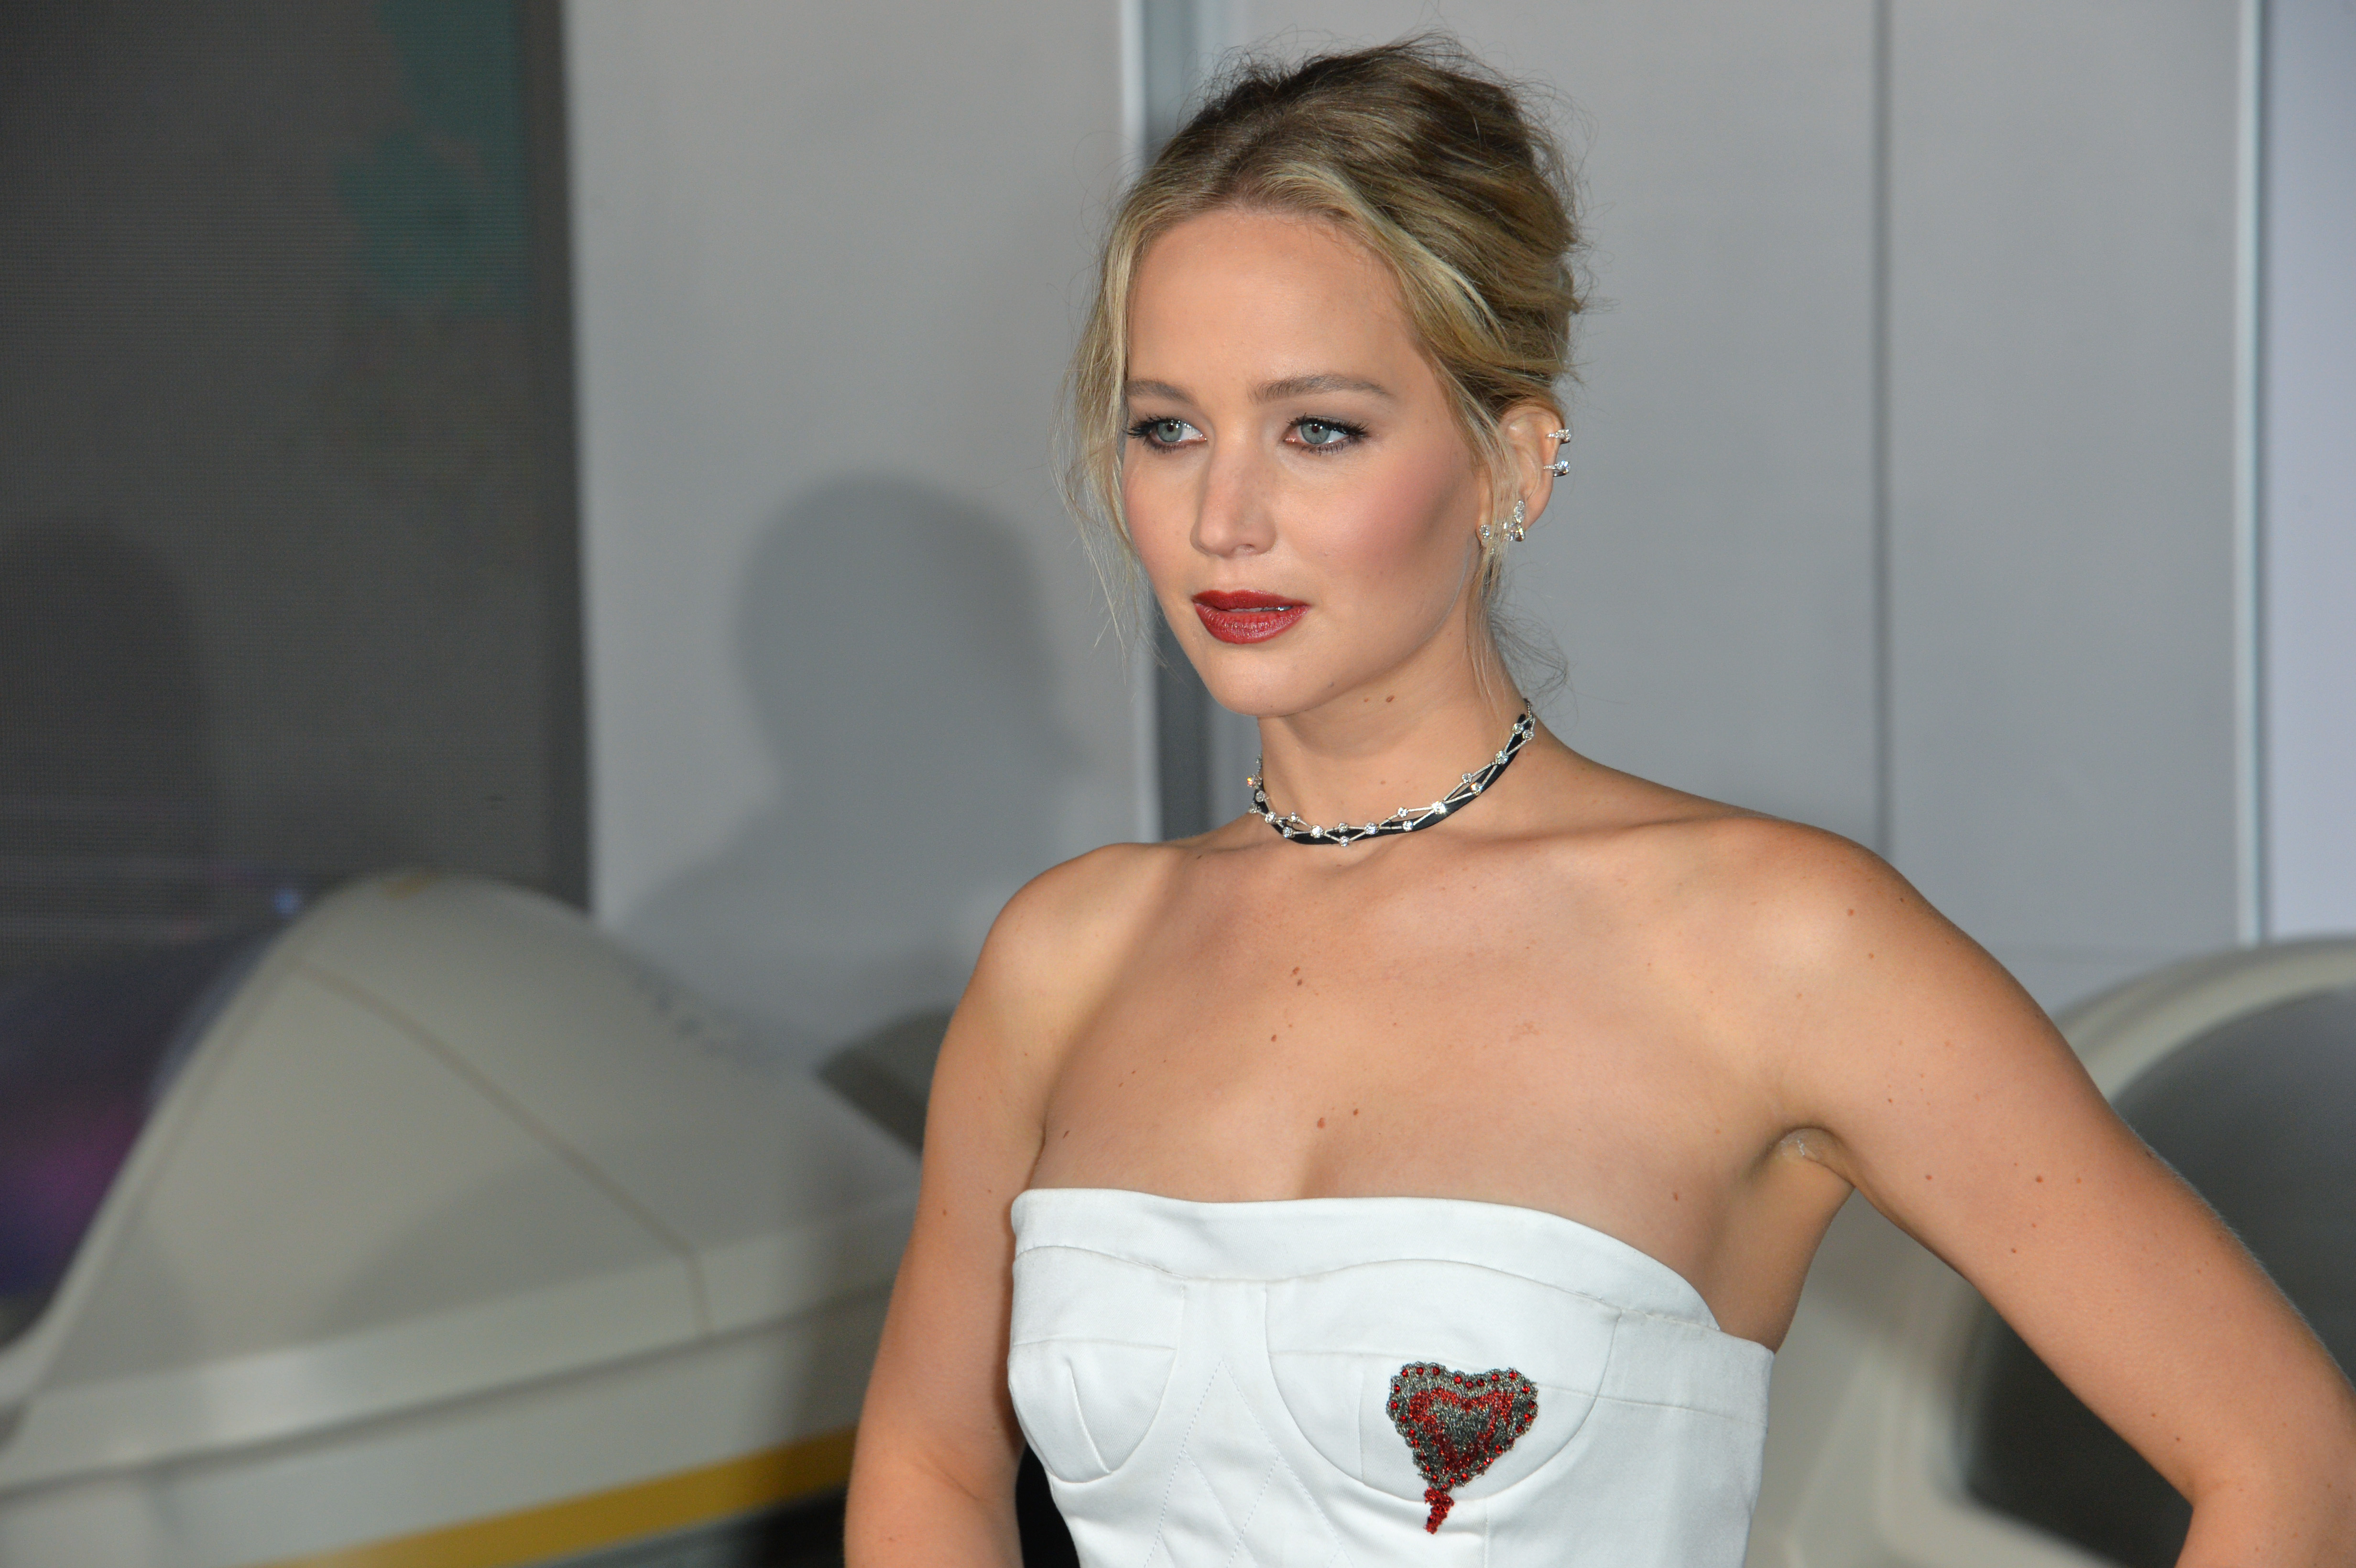 Celebrity Jennifer Lawrence’s Documentary about Afghan Women, Bread and Roses, Debuts at 2023 Cannes Film Festival